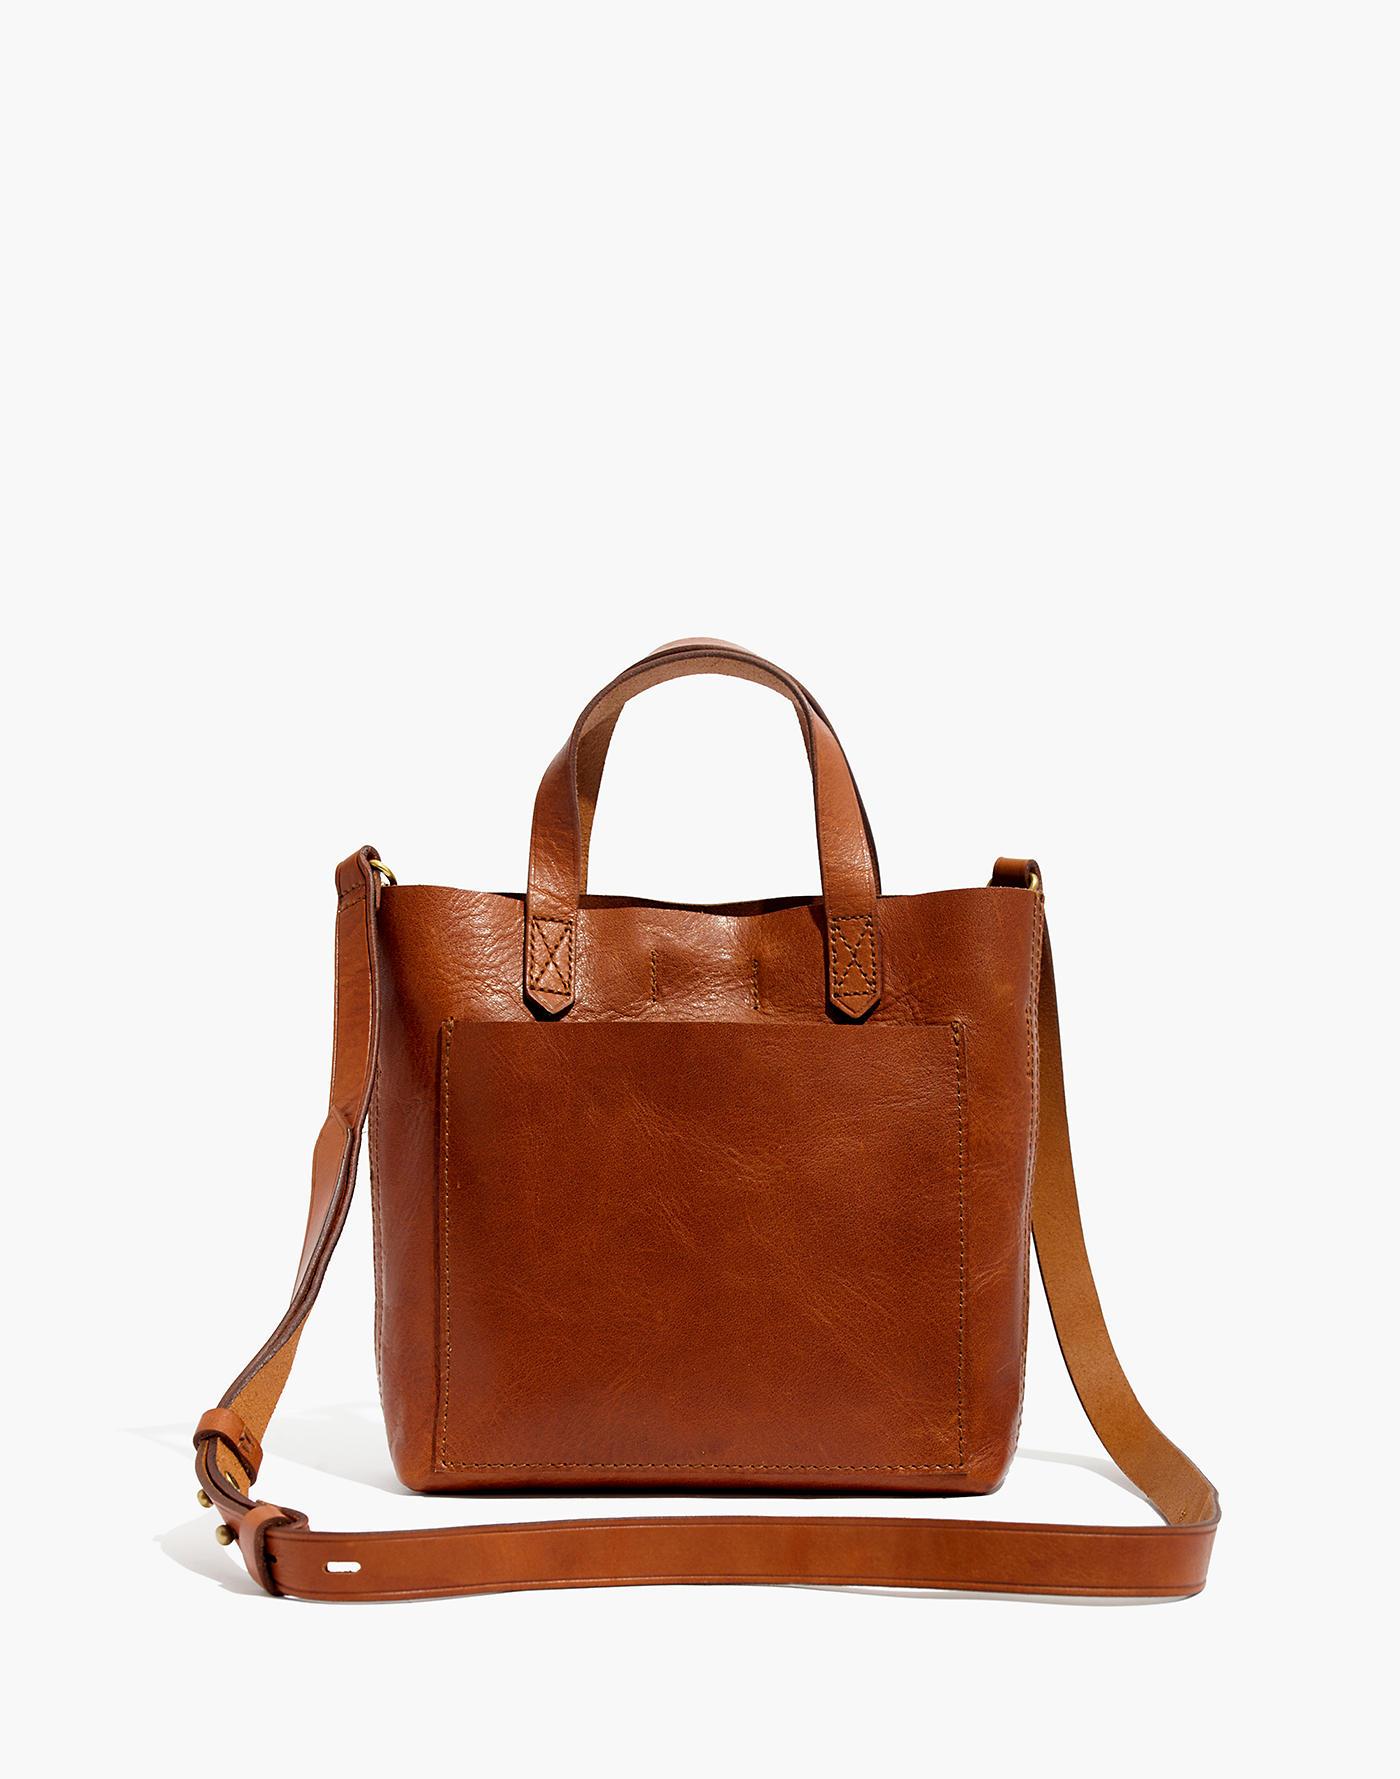 Madewell Small Transport Leather Crossbody Bag in Brown - Lyst